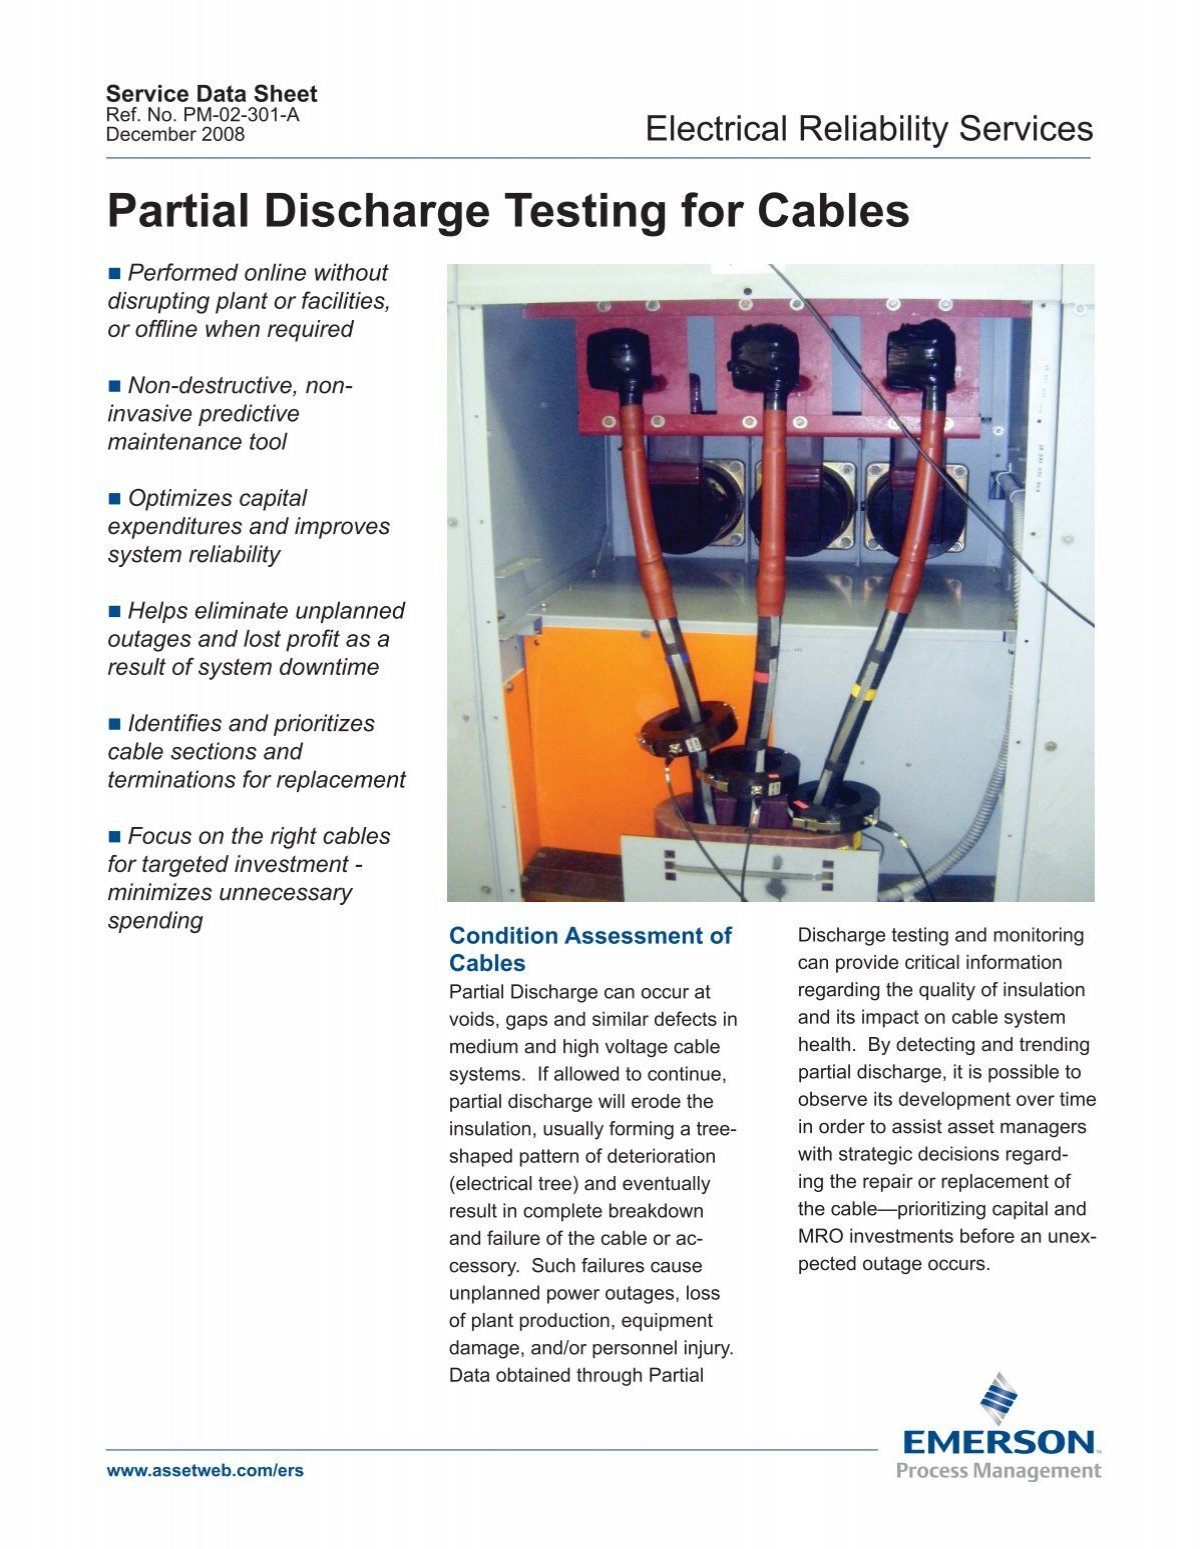 Partial Discharge Testing of Cables